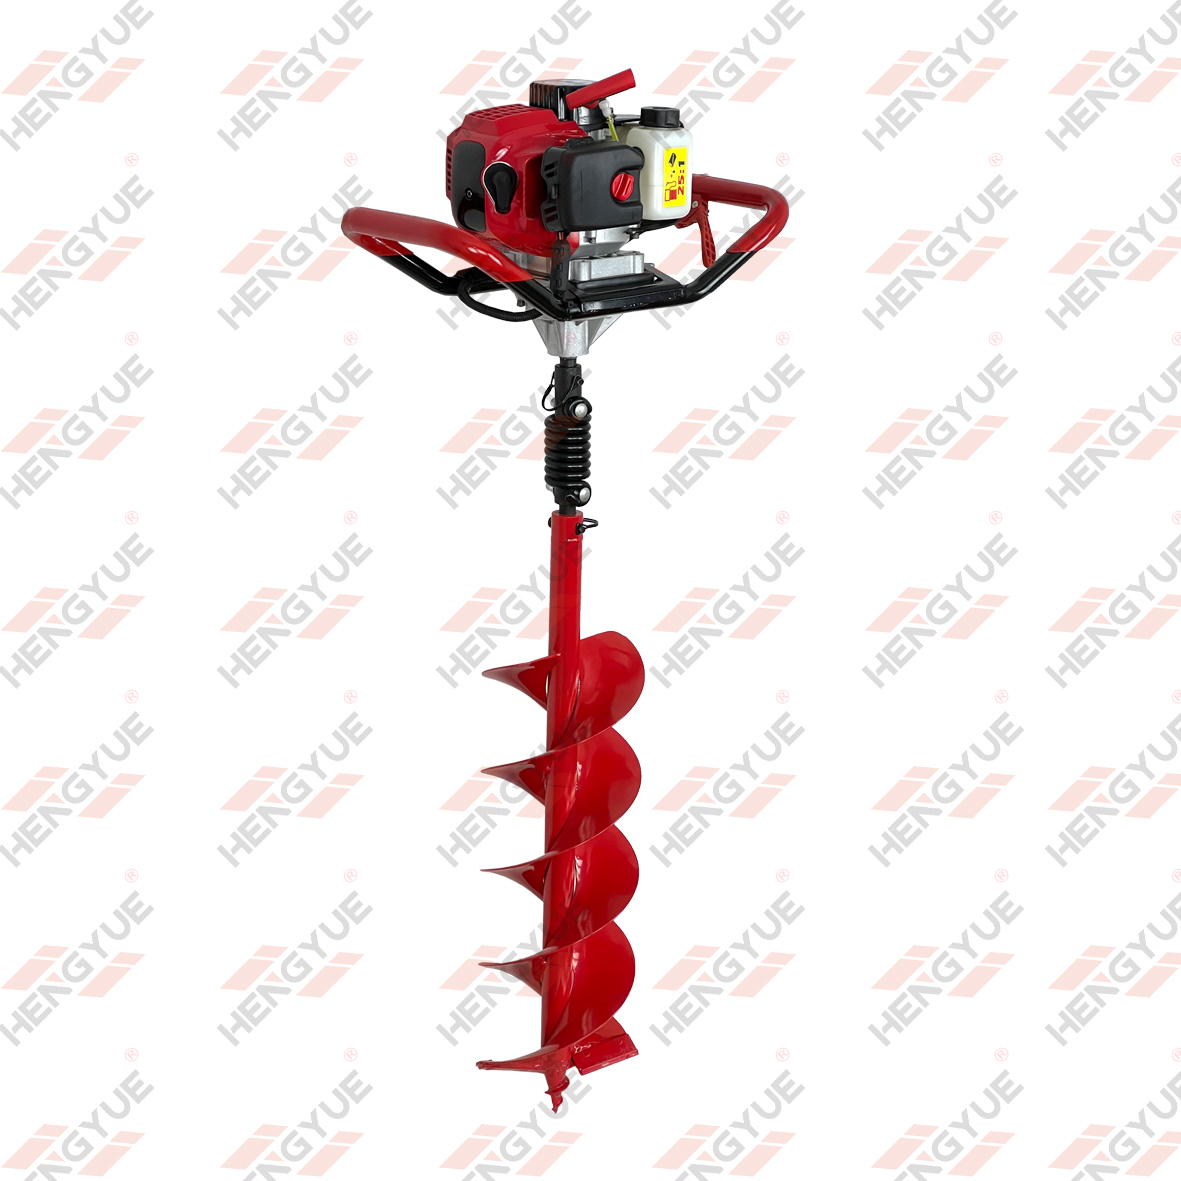 58CC 2 Stroke Hand Held Earth Auger Drilling Machine